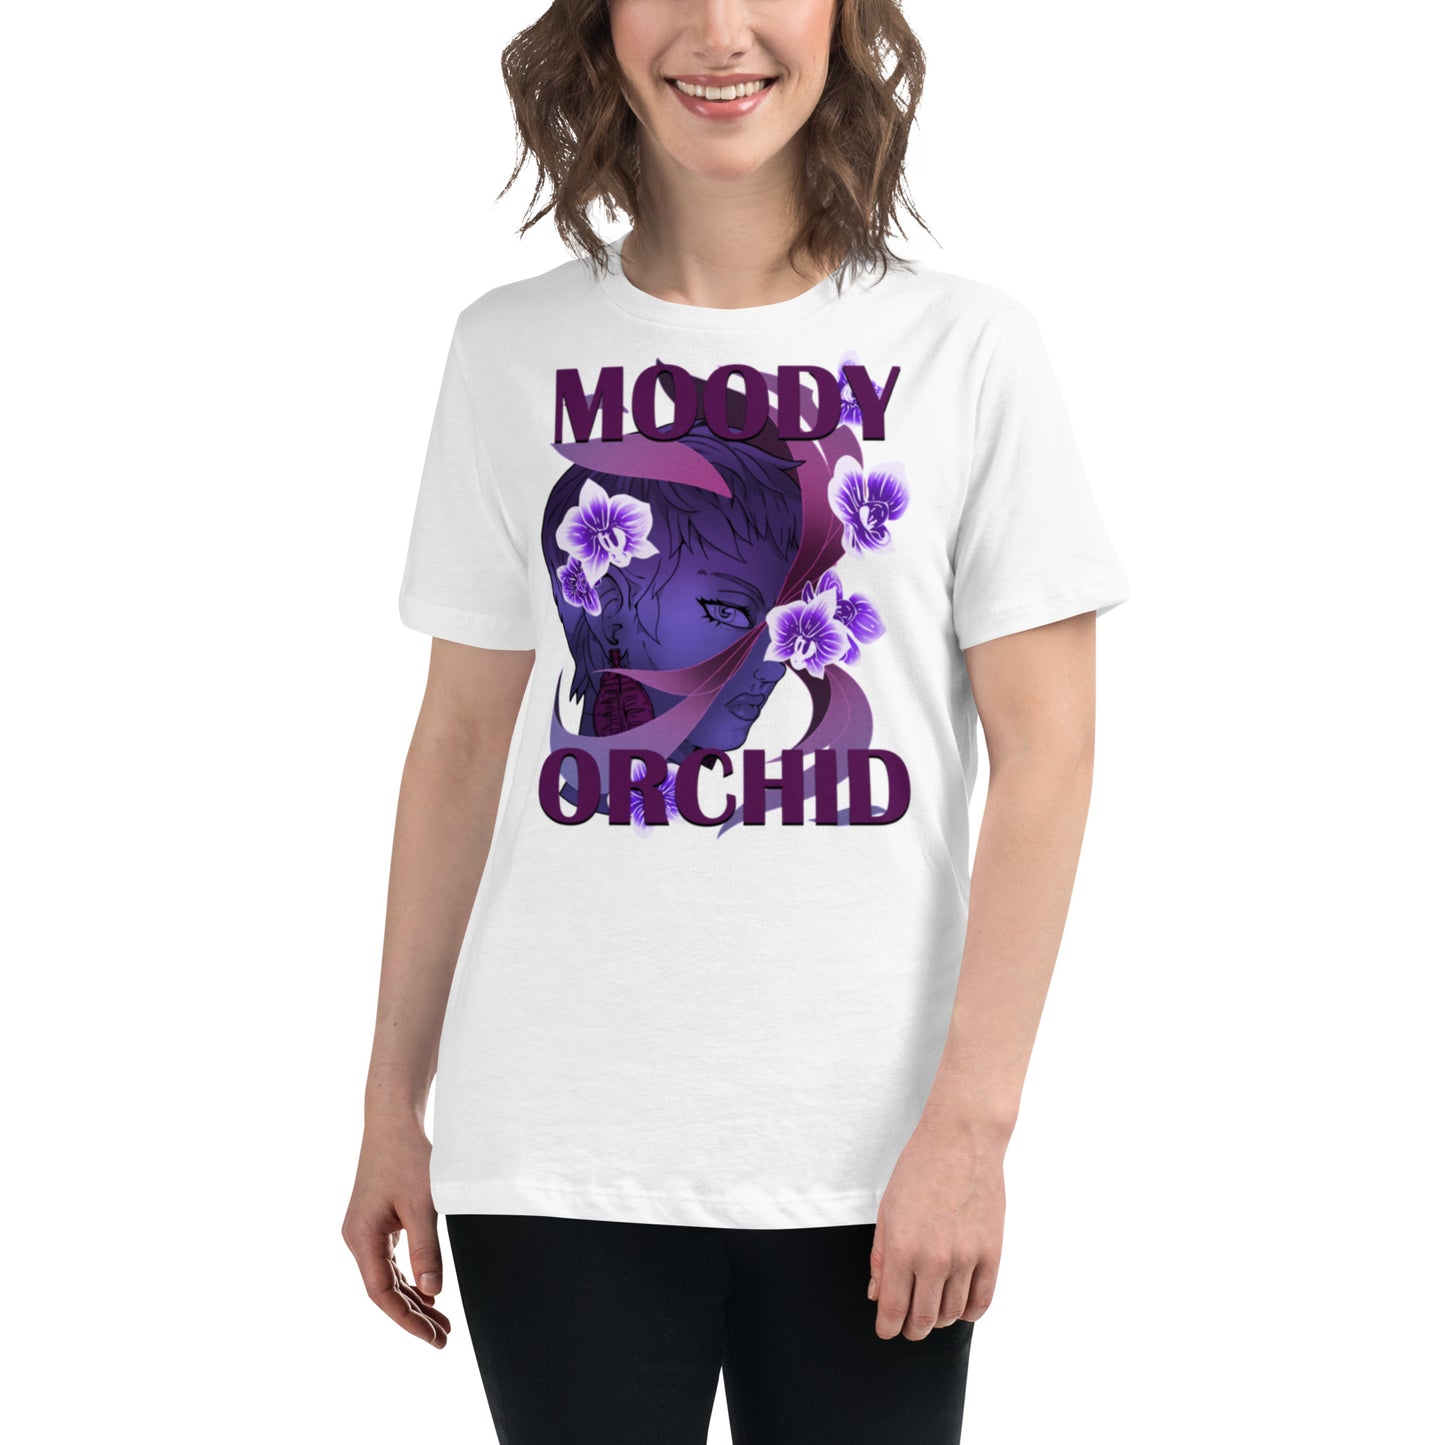 Moody Orchid P Women's Relaxed T-Shirt